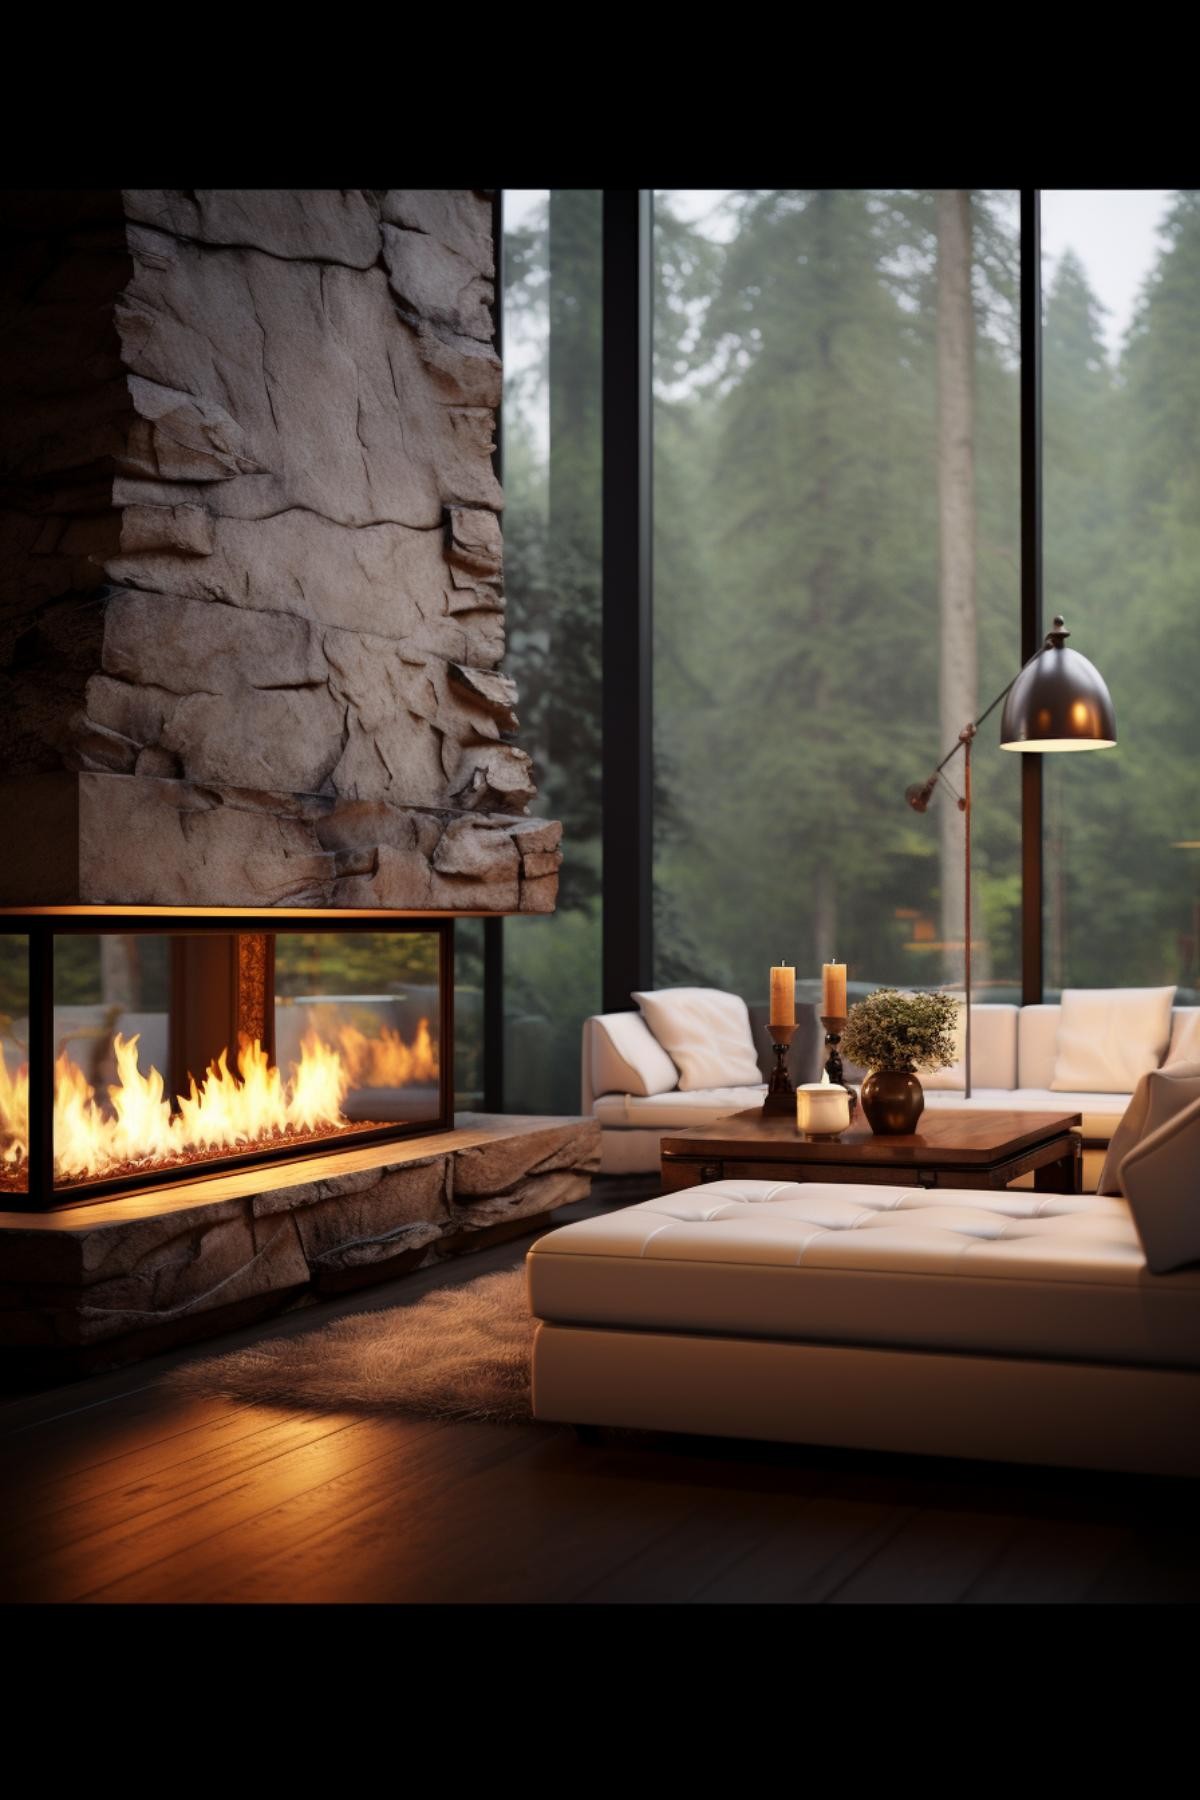 Stone Fireplace and Misty Mountains